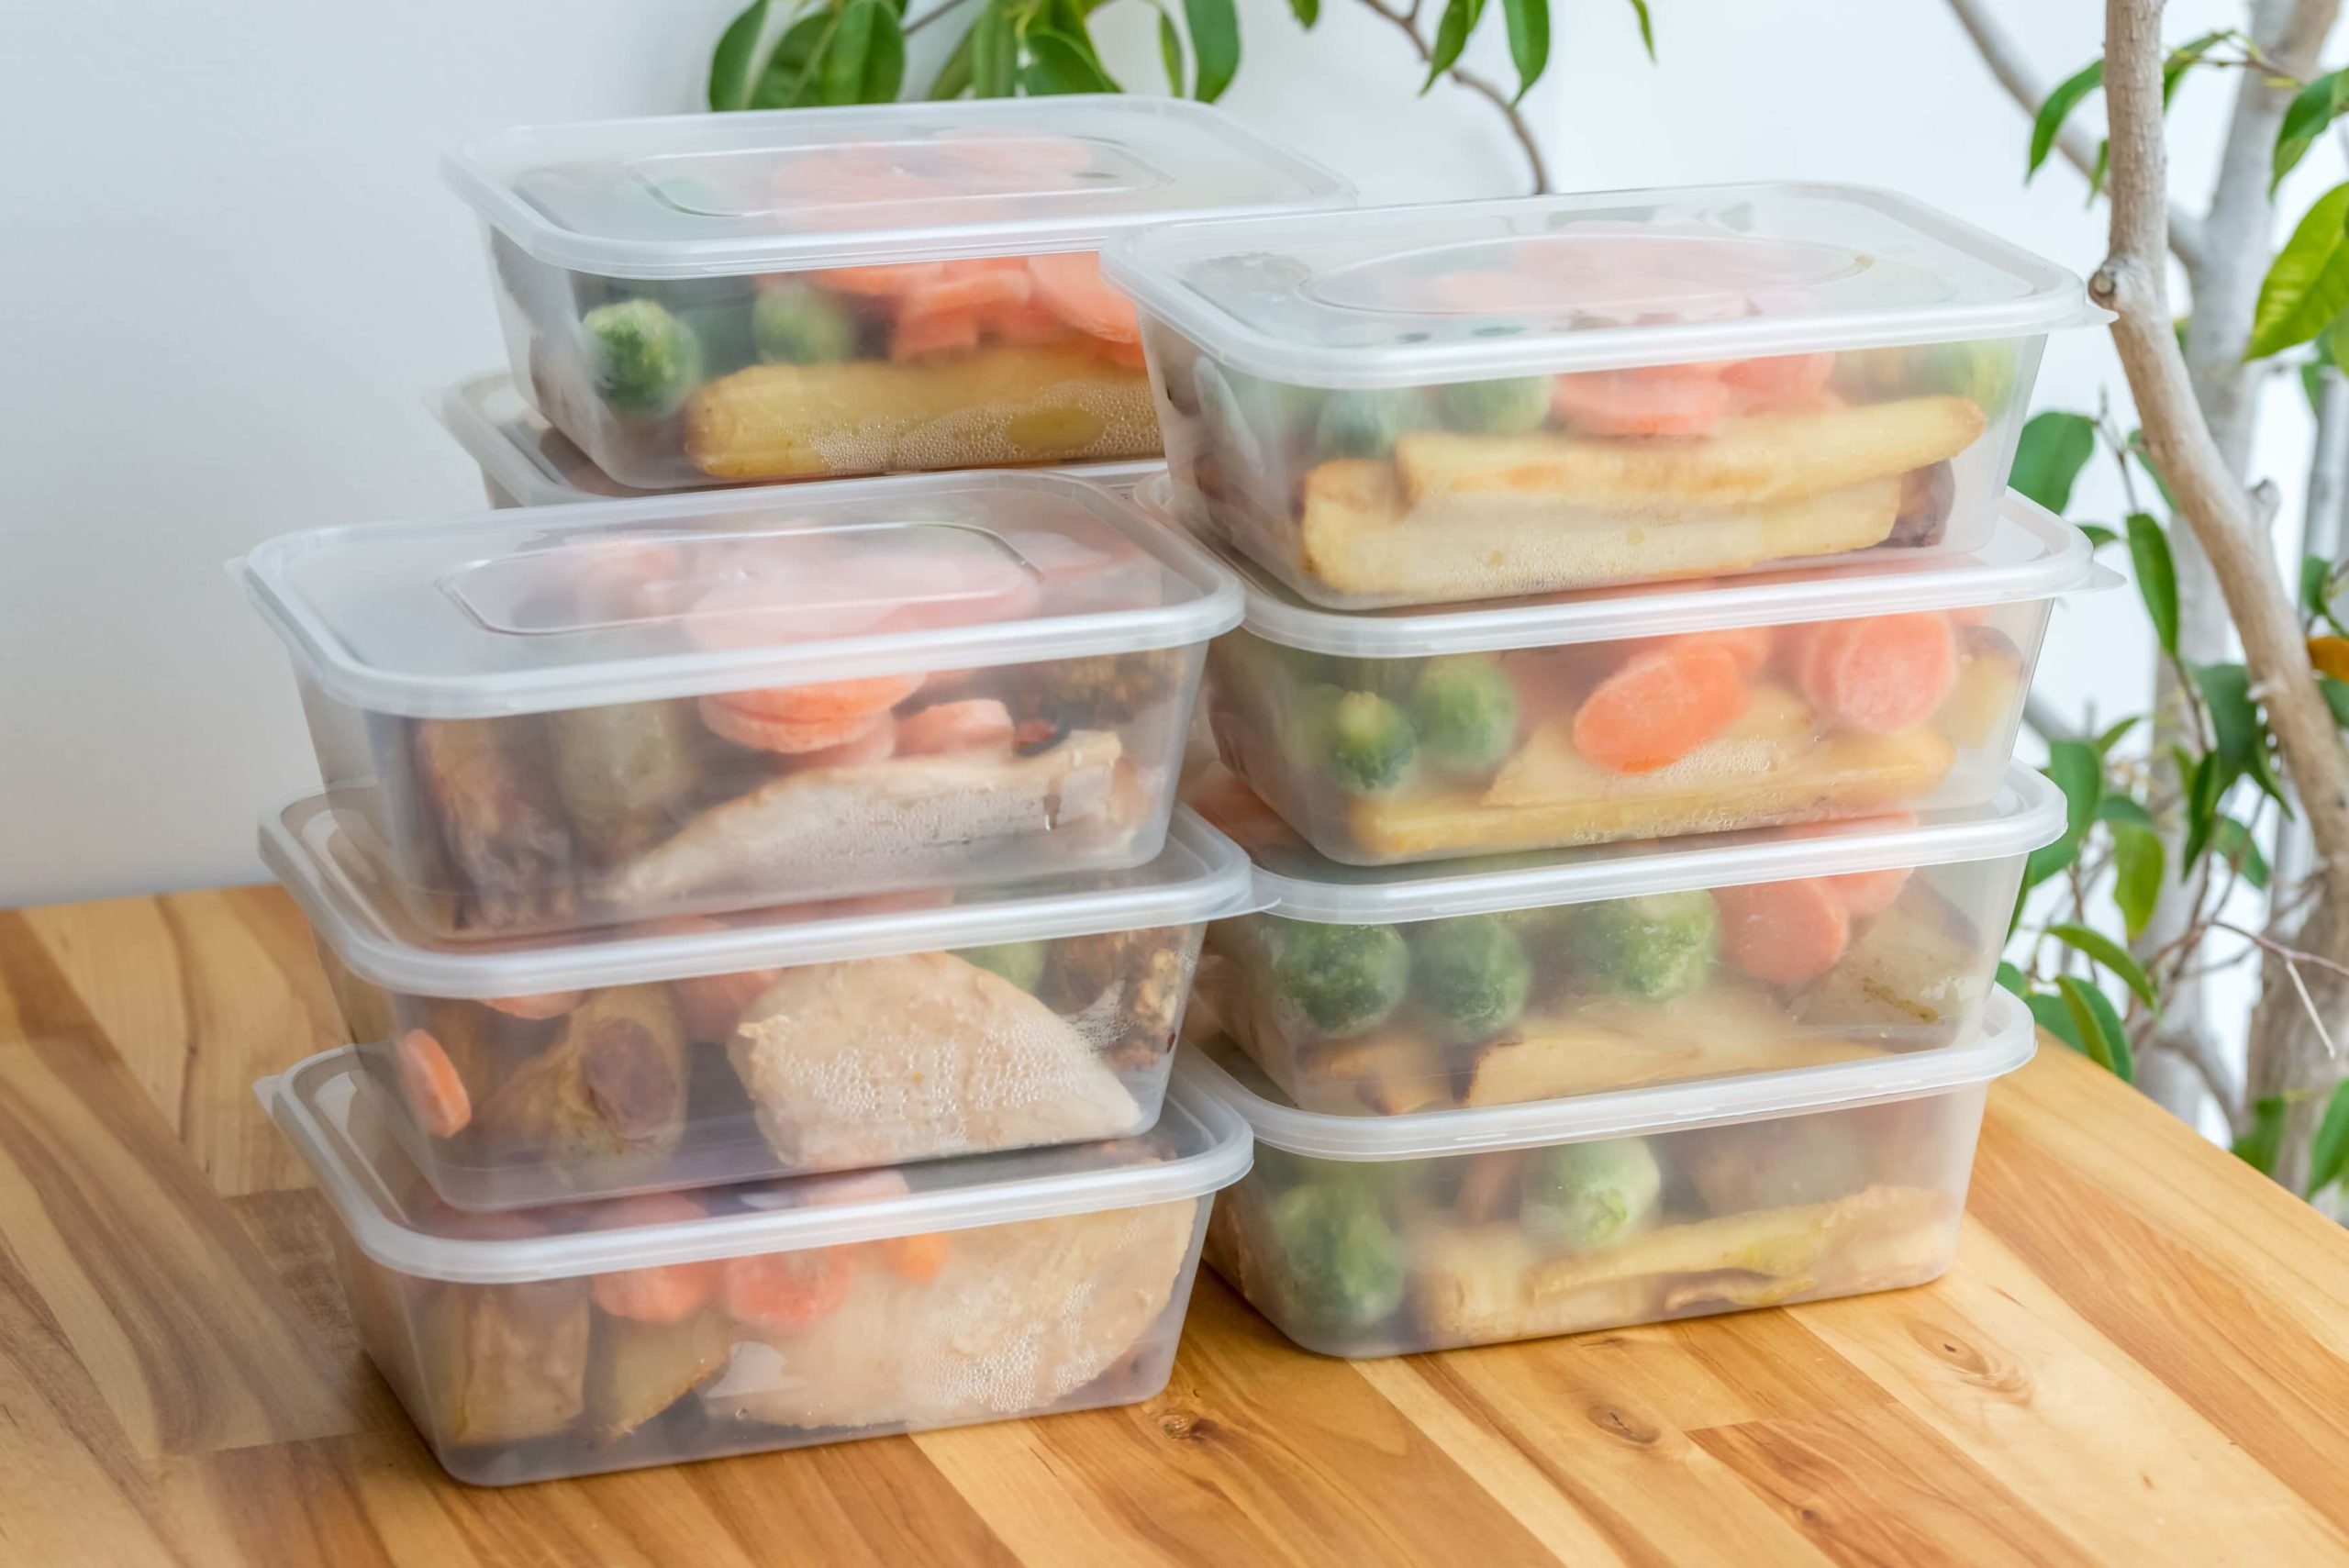 Meals prepped in containers for the week.